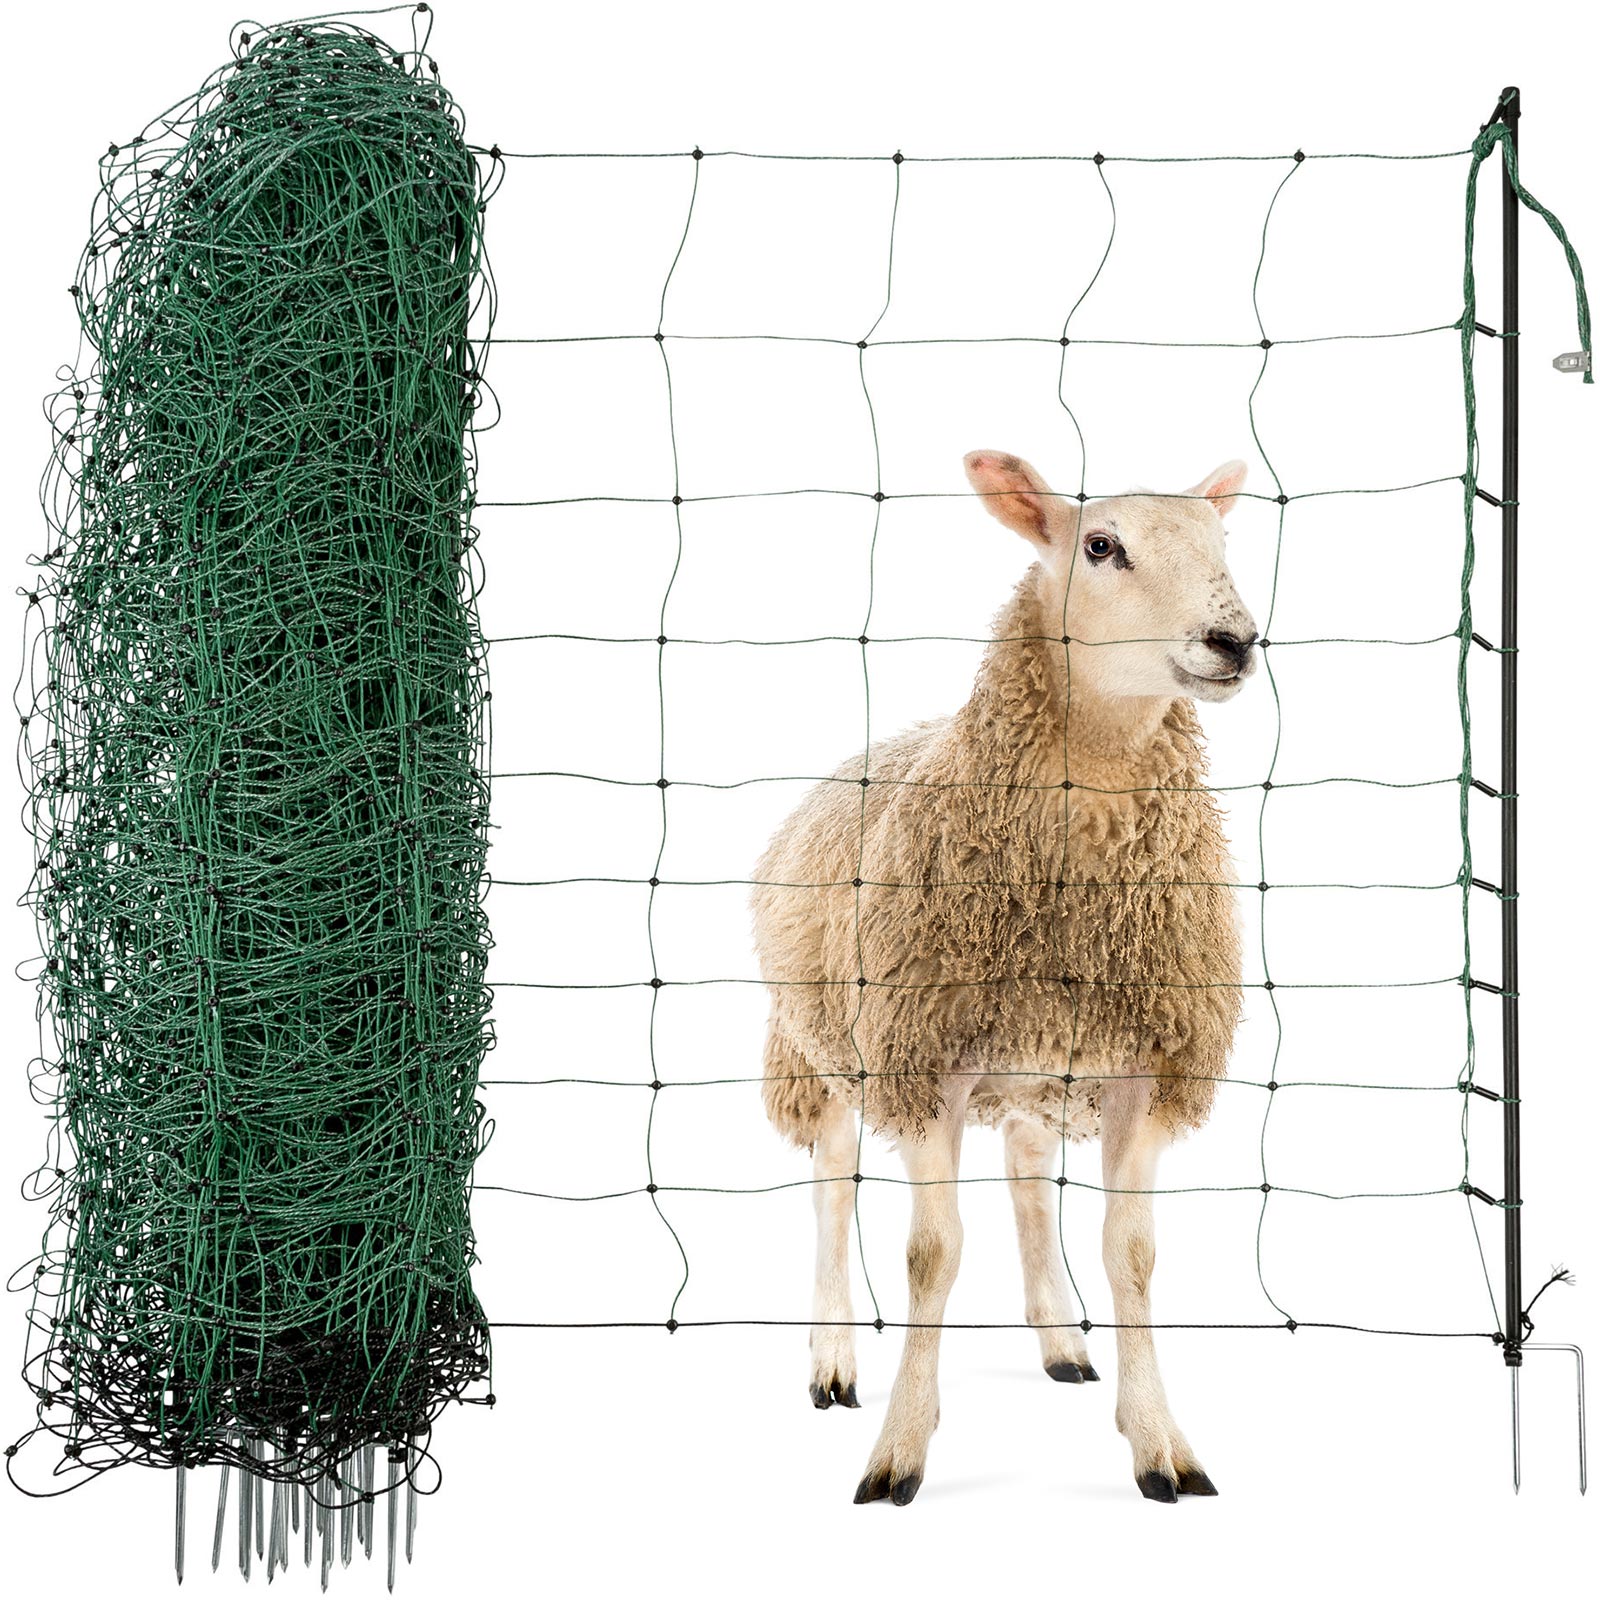 Agrarzone Sheep Net Classic electrificable, double tip, green 50 m x 108 cm